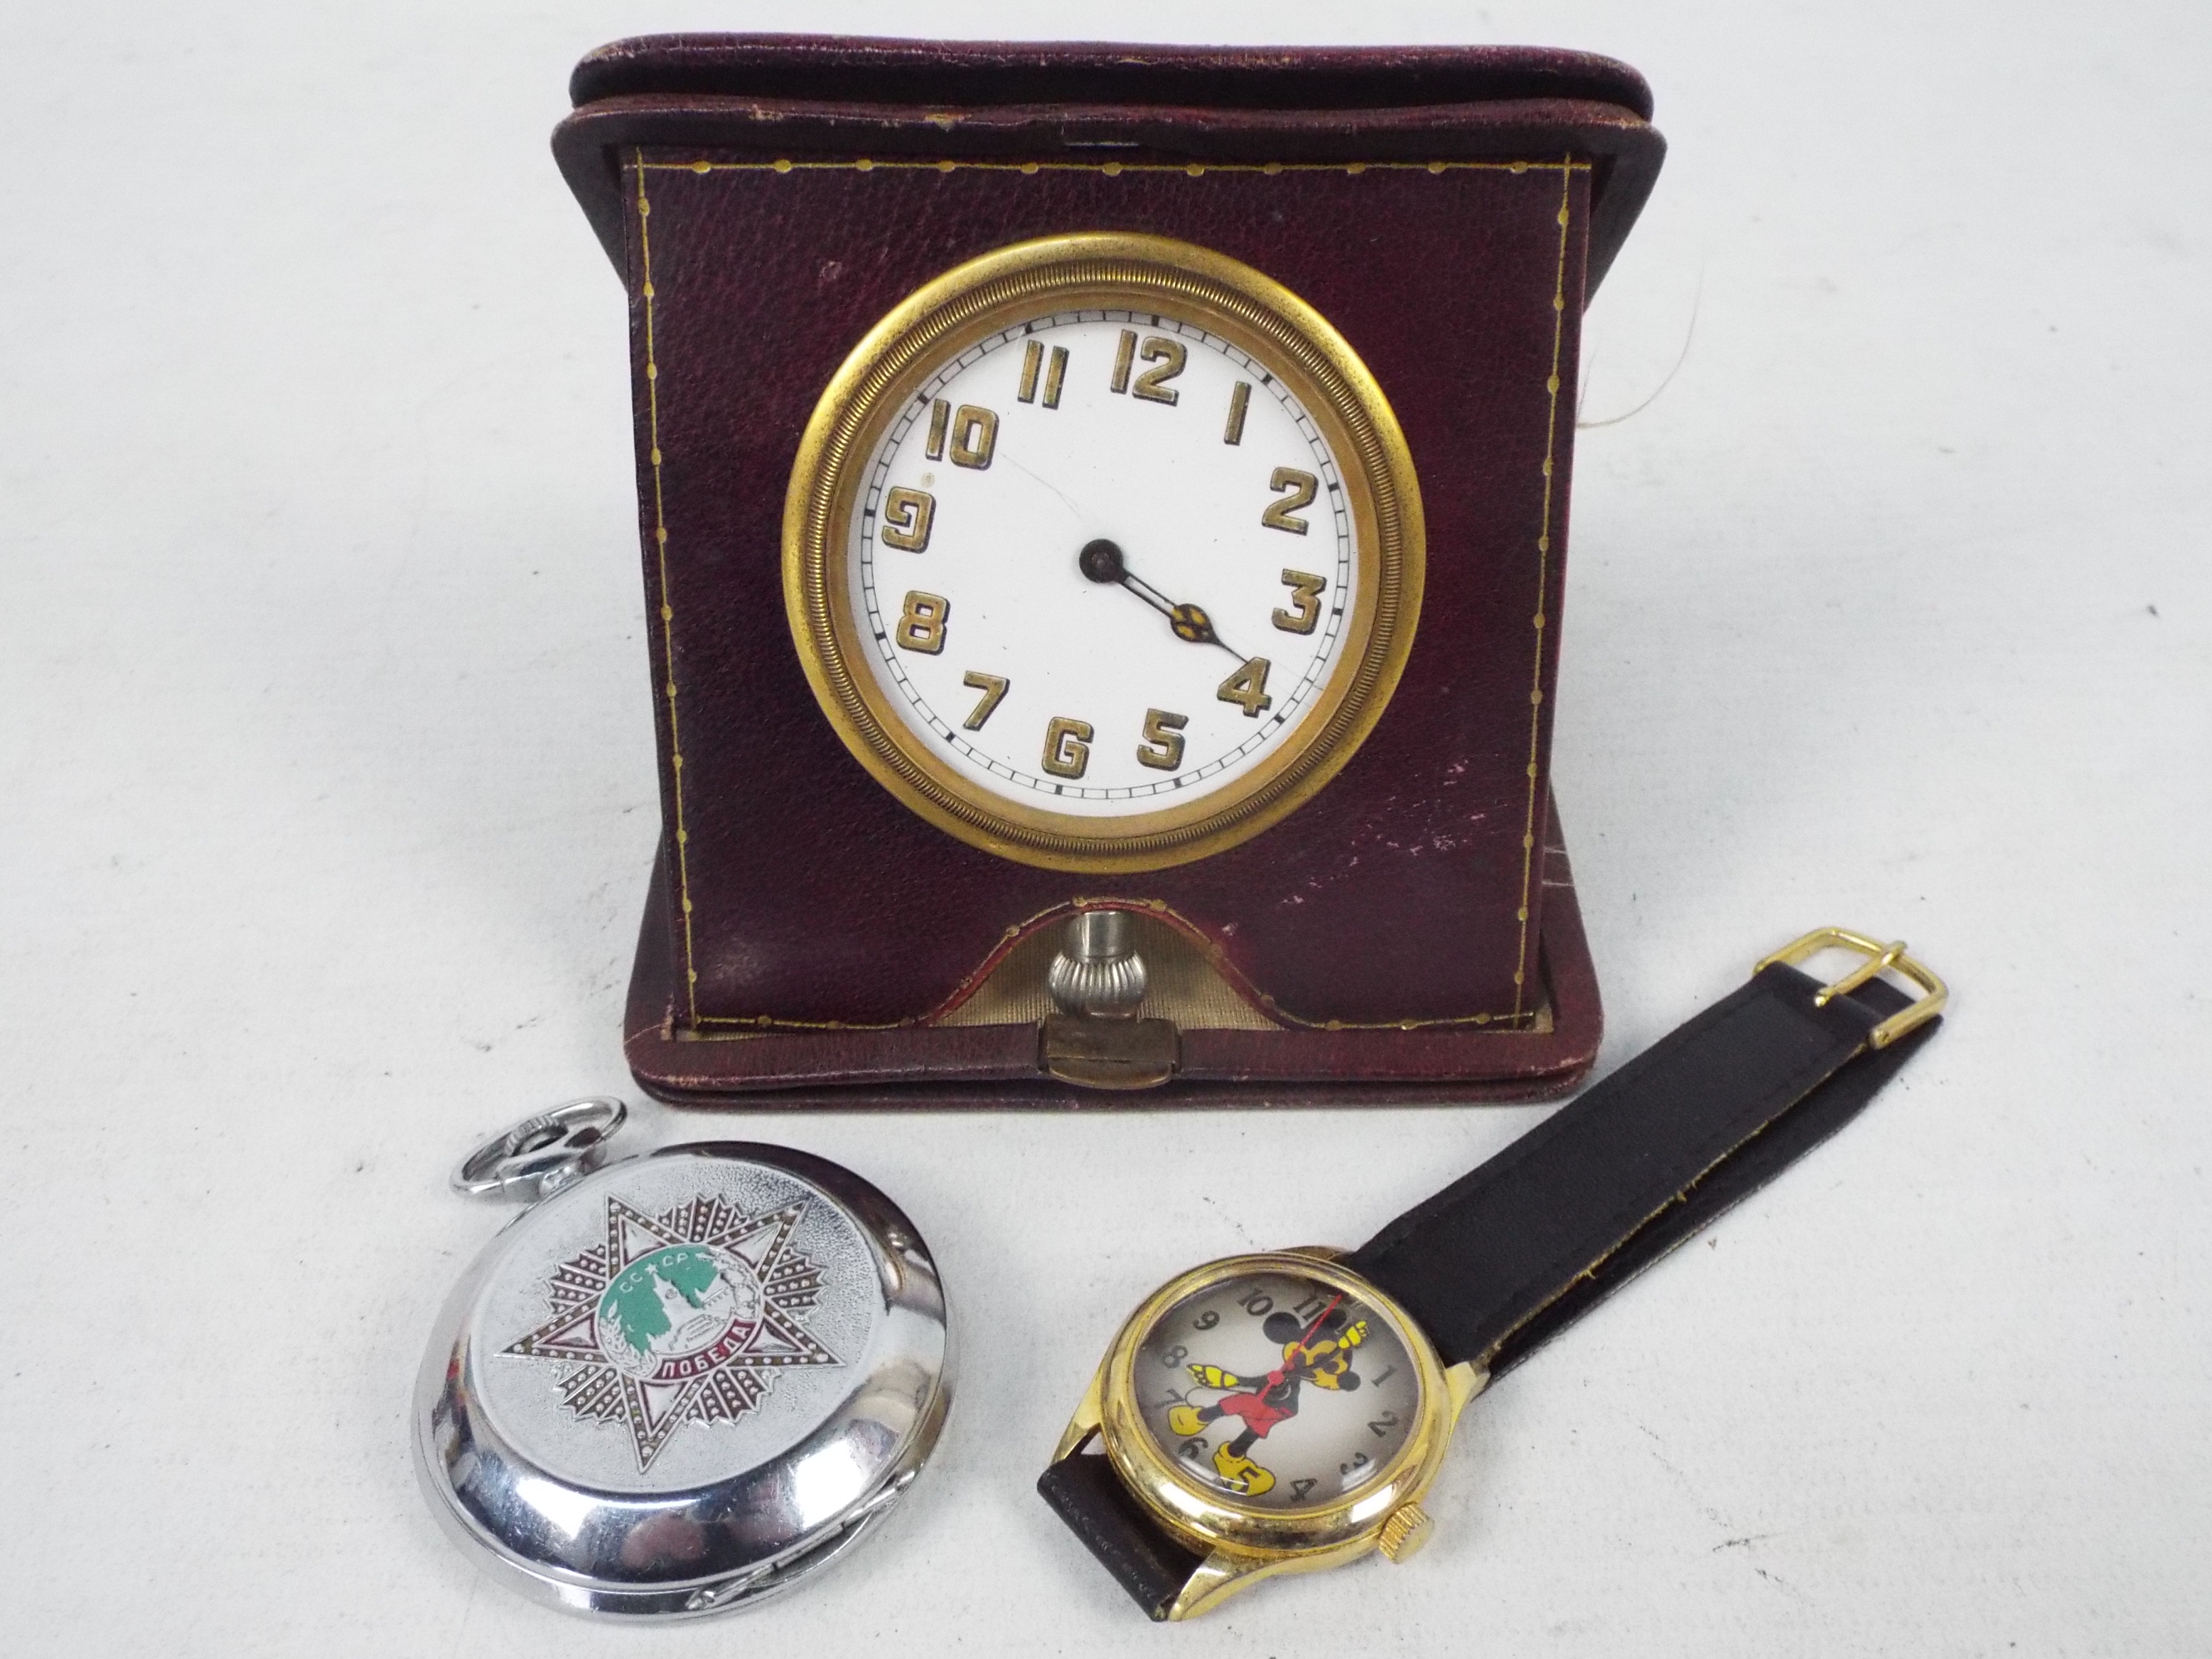 A vintage German travel clock in leather pouch, Russian pocket watch and a wrist watch.